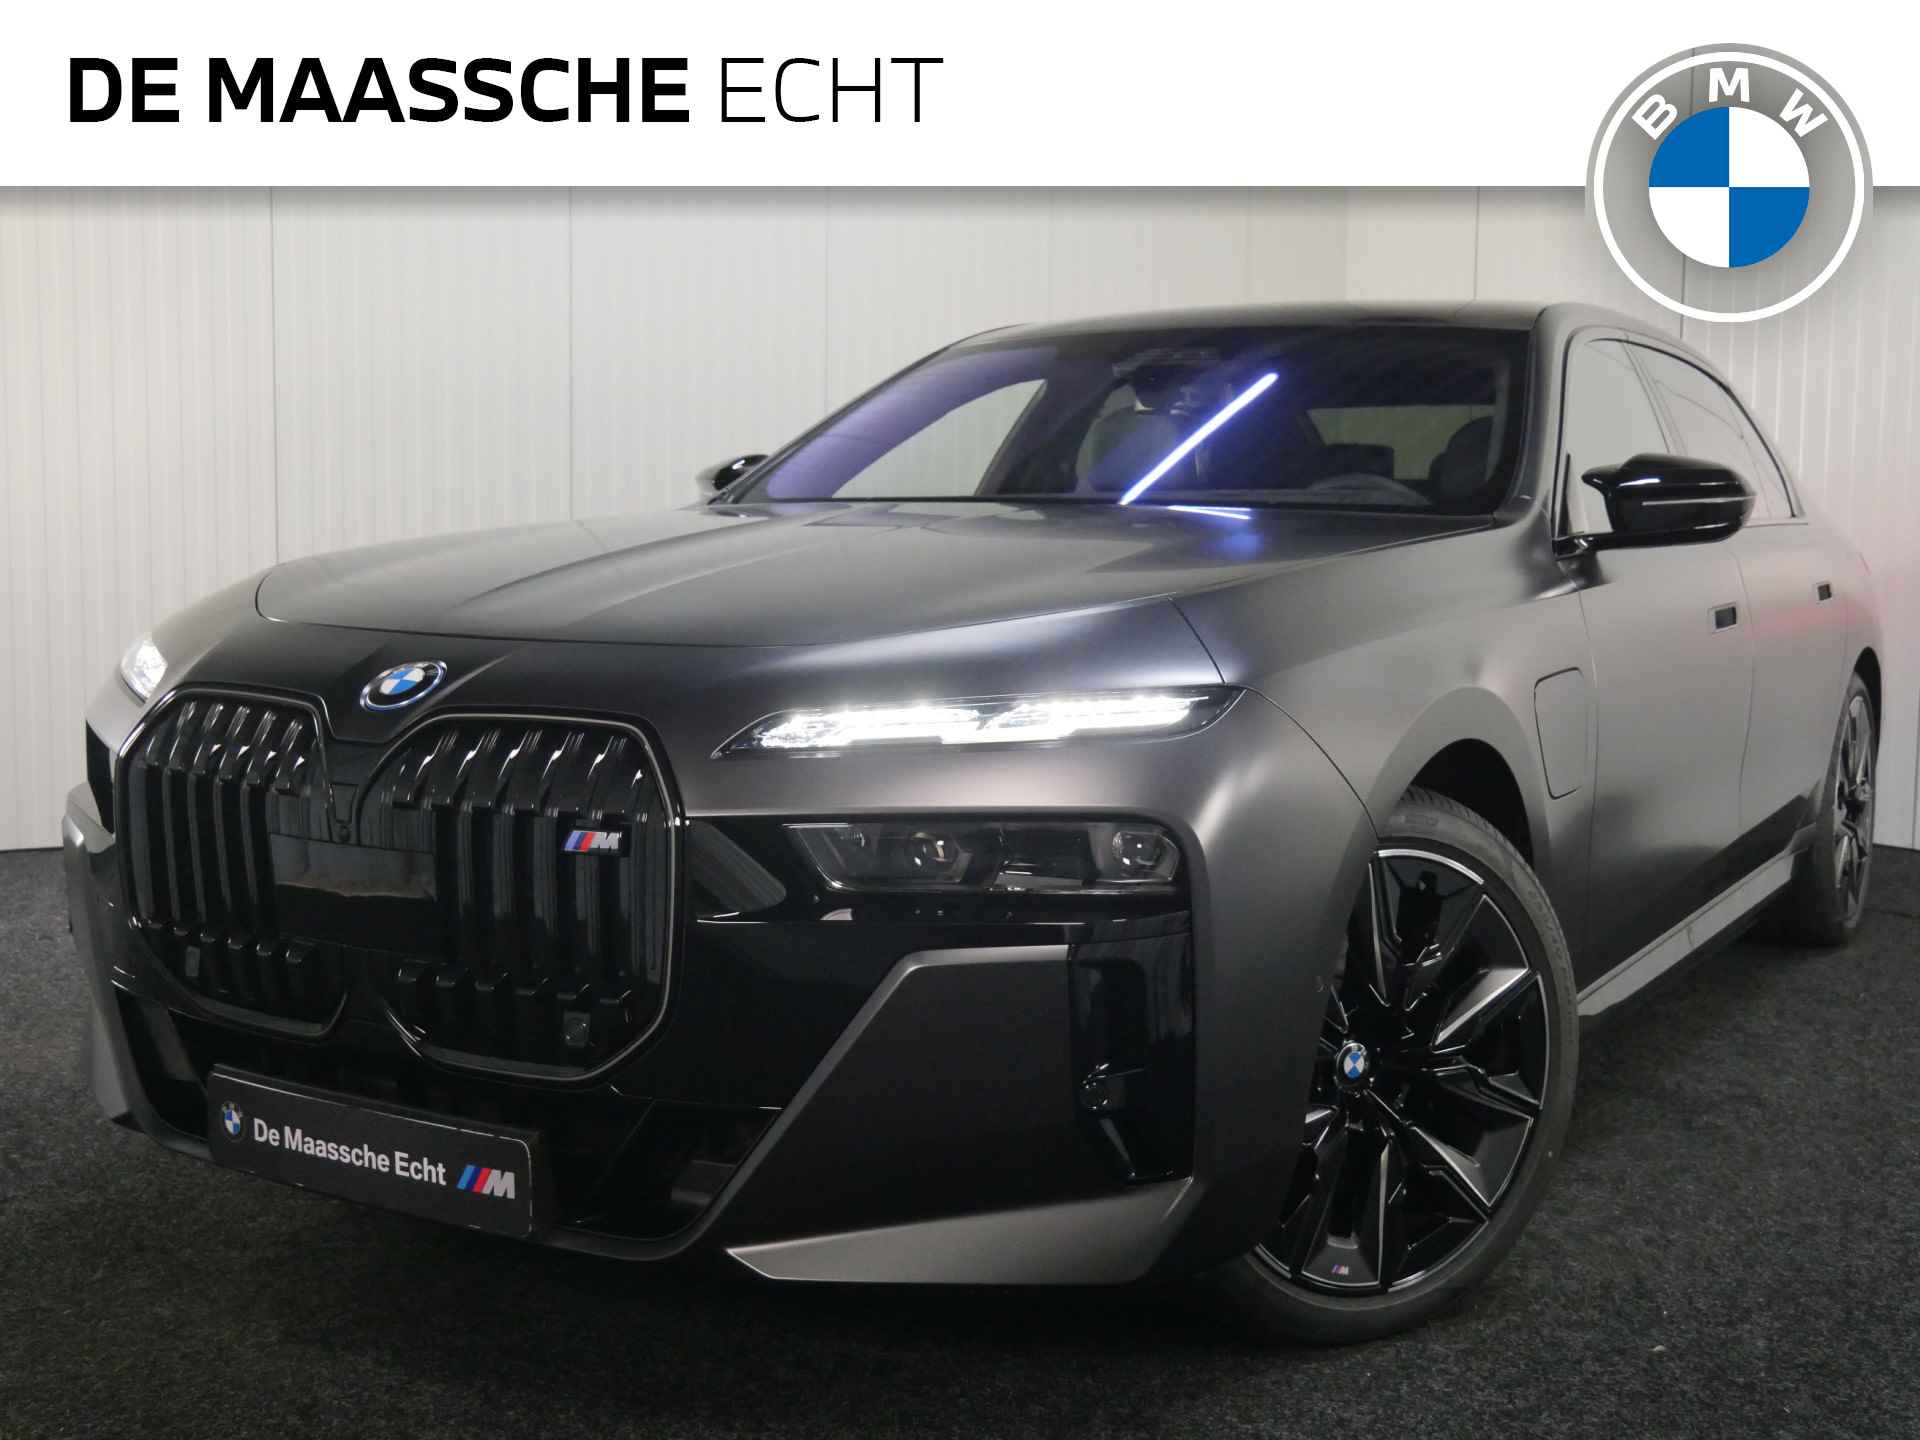 BMW 7 Serie M760e xDrive High Executive Automaat / Panoramadak Sky Lounge / Massagefunctie voor + achter / Bowers & Wilkins / Parking Assistant Professional / Active Steering - 1/45